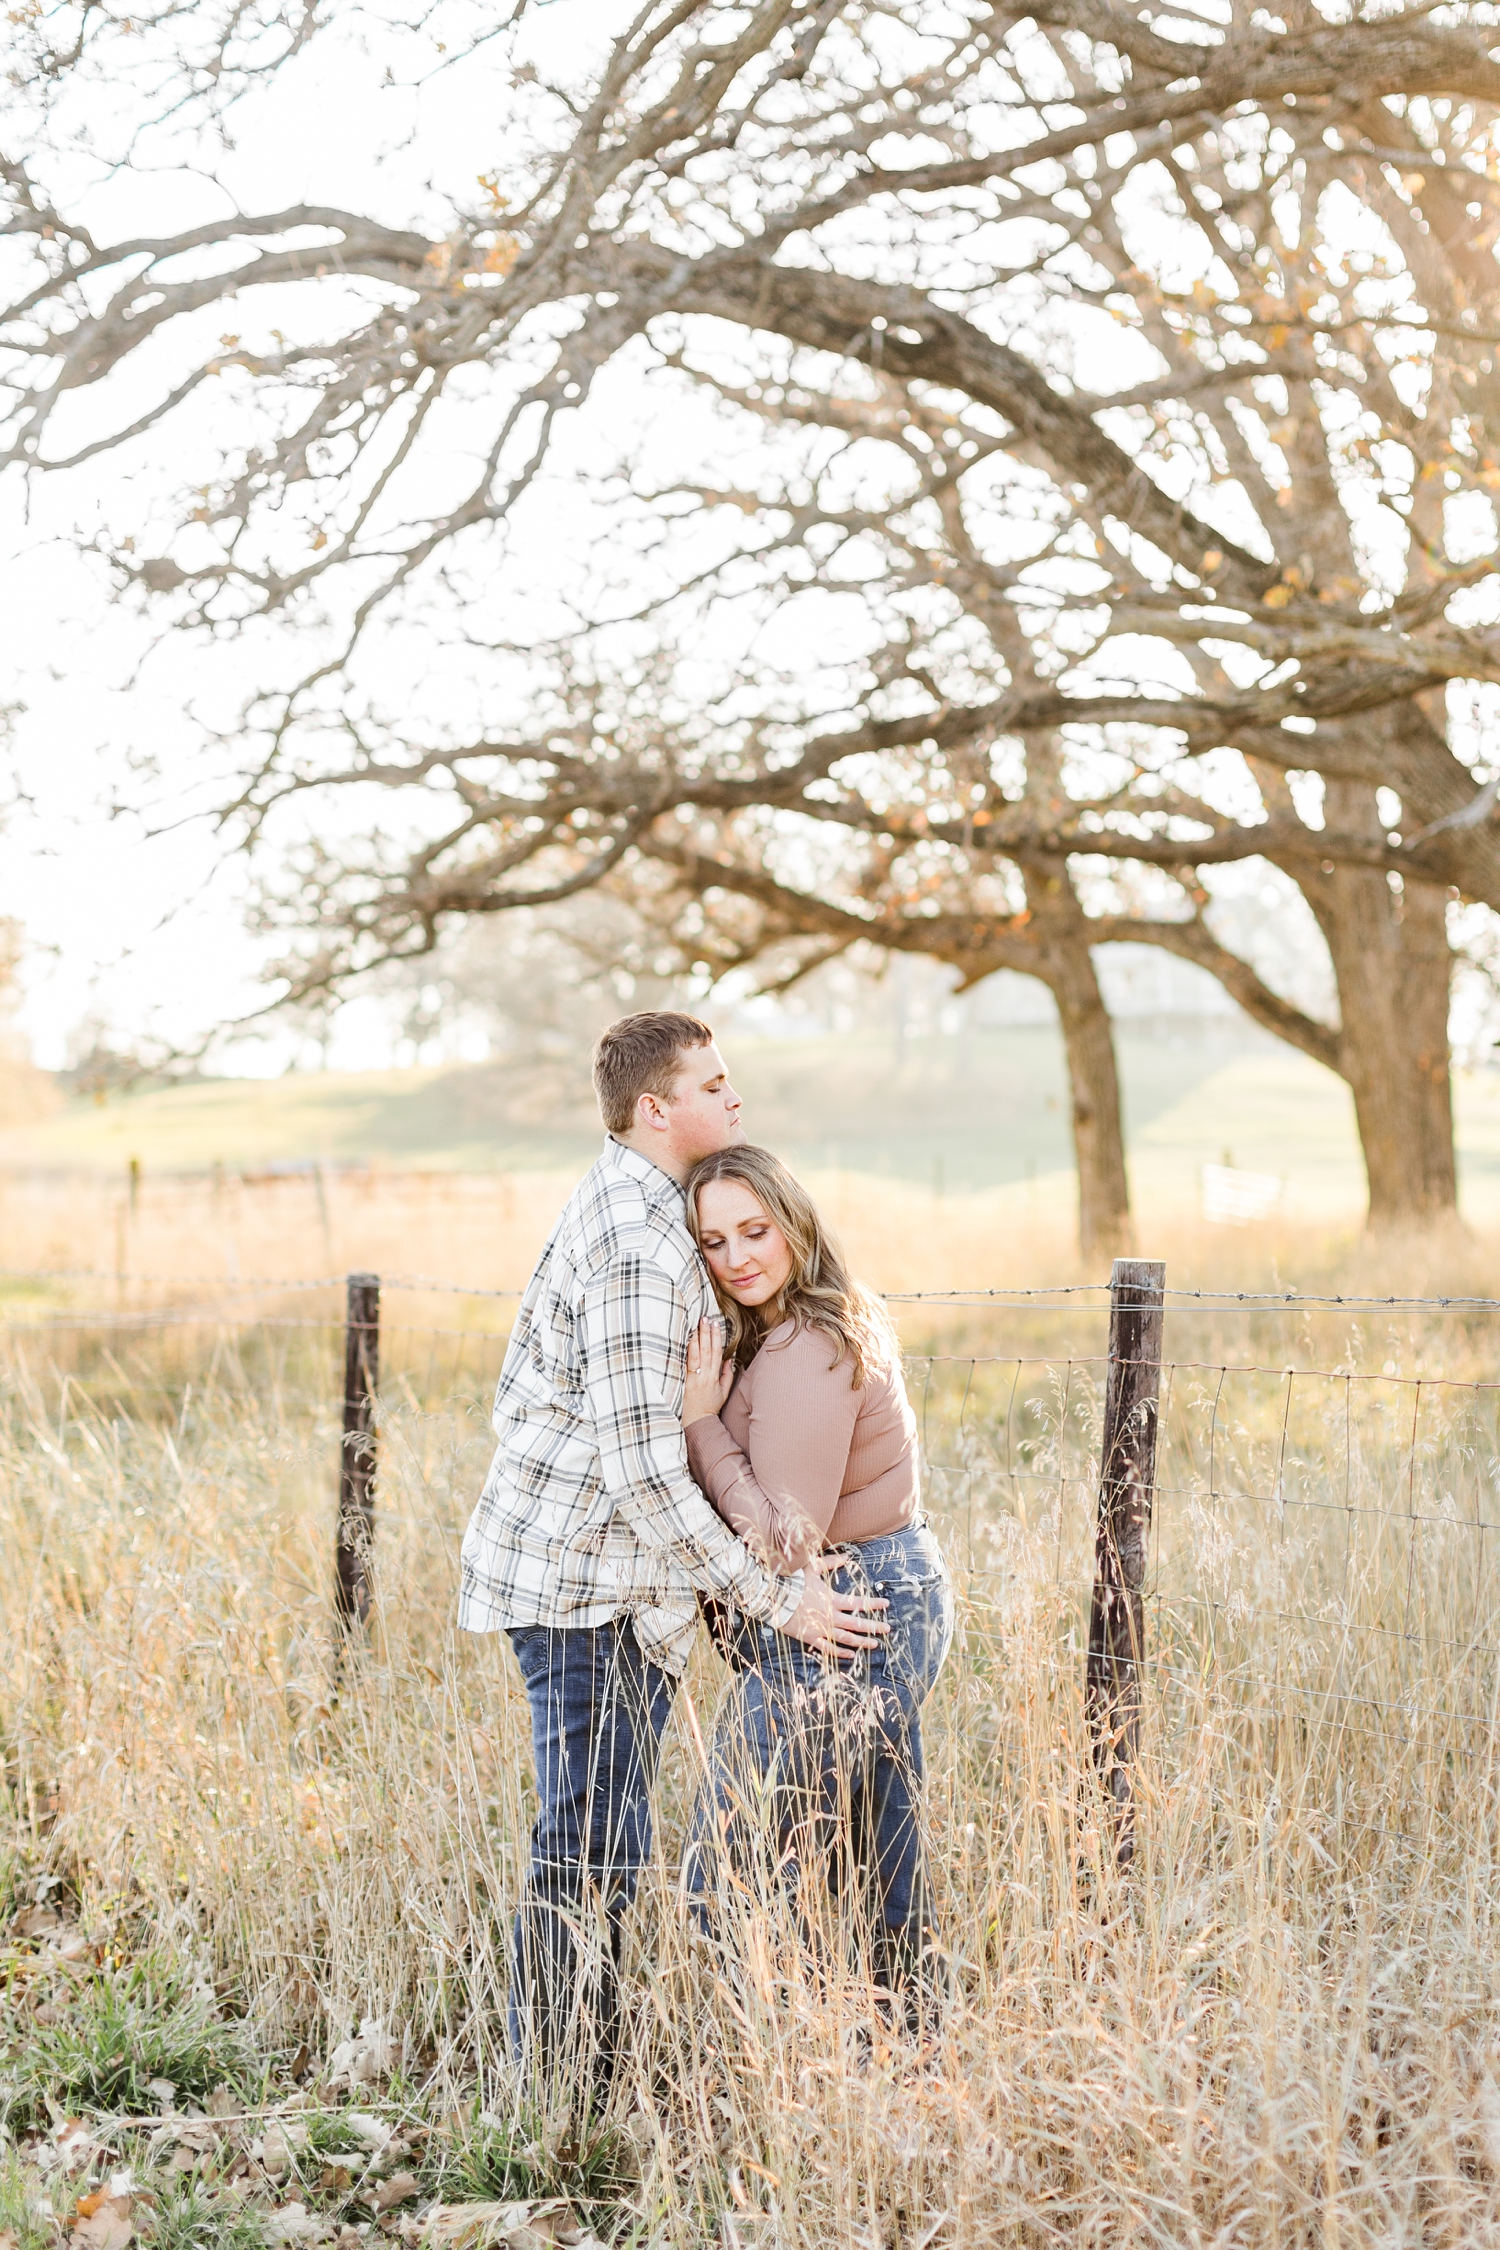 Shelby and Taylor embrace each other along a fence line in a grass pasture during golden hour in Iowa | CB Studio